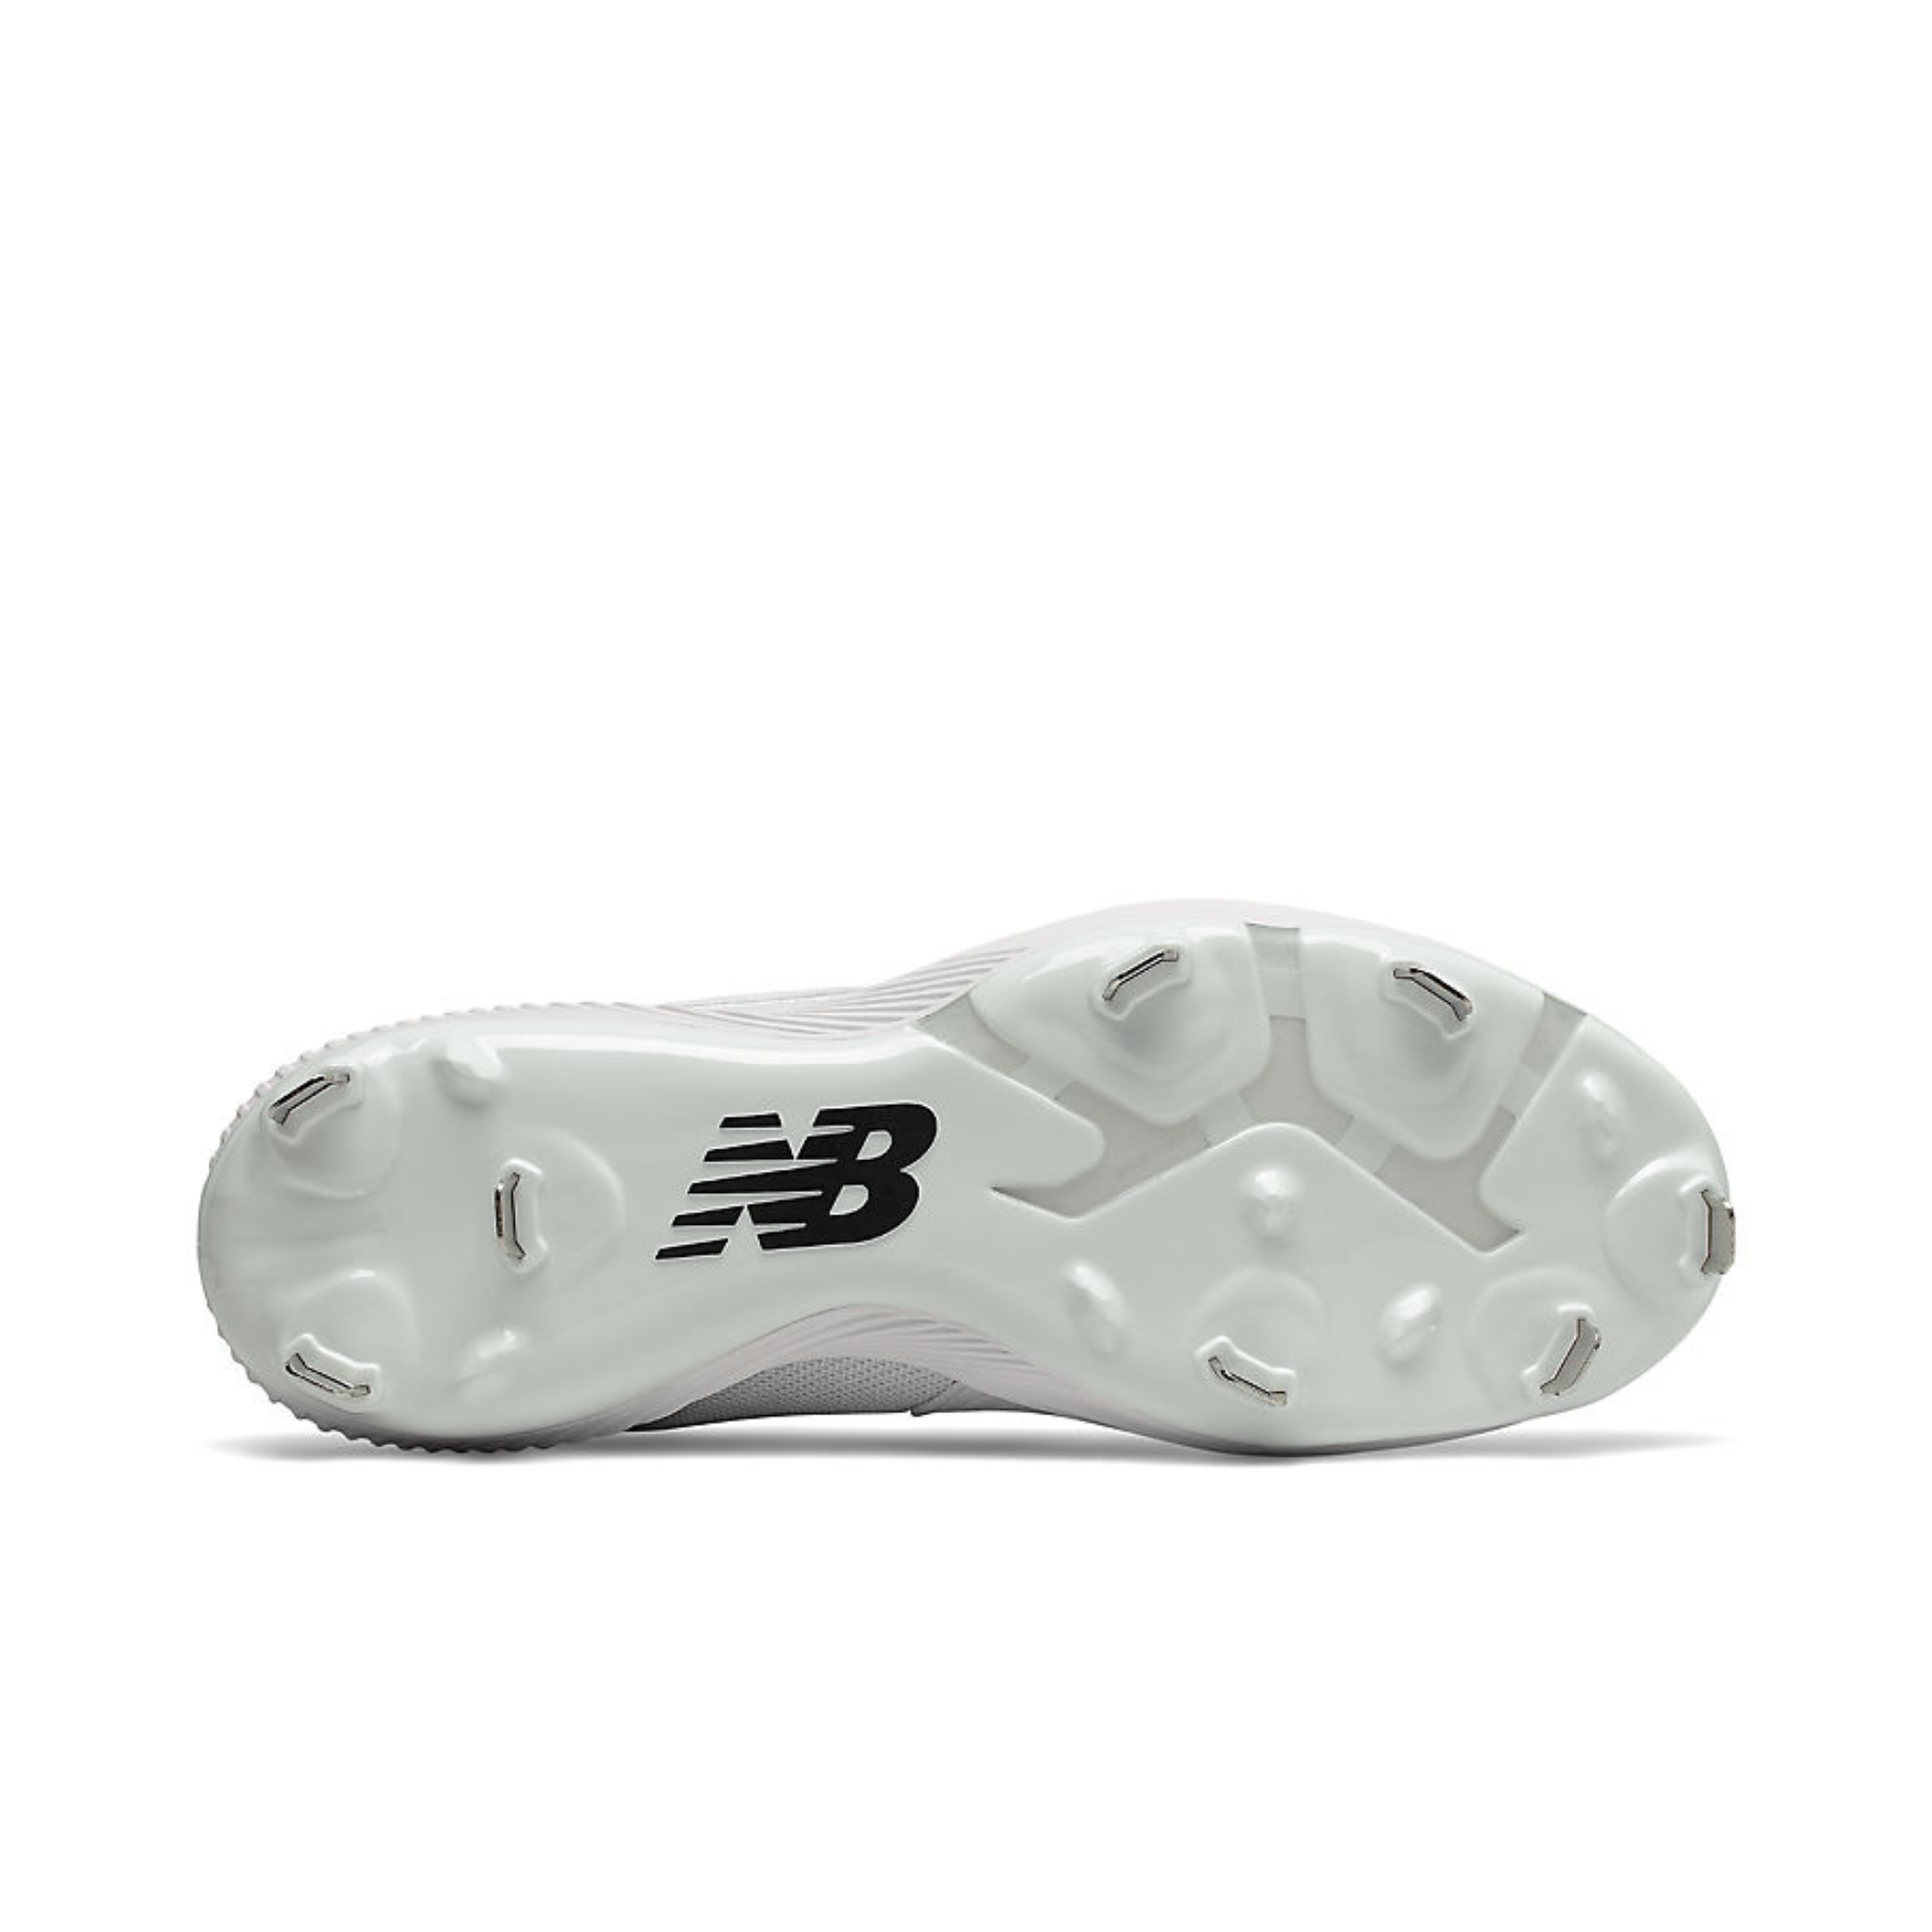 New Balance FuelCell 4040 v6 Metal Cleat L4040TW6 White